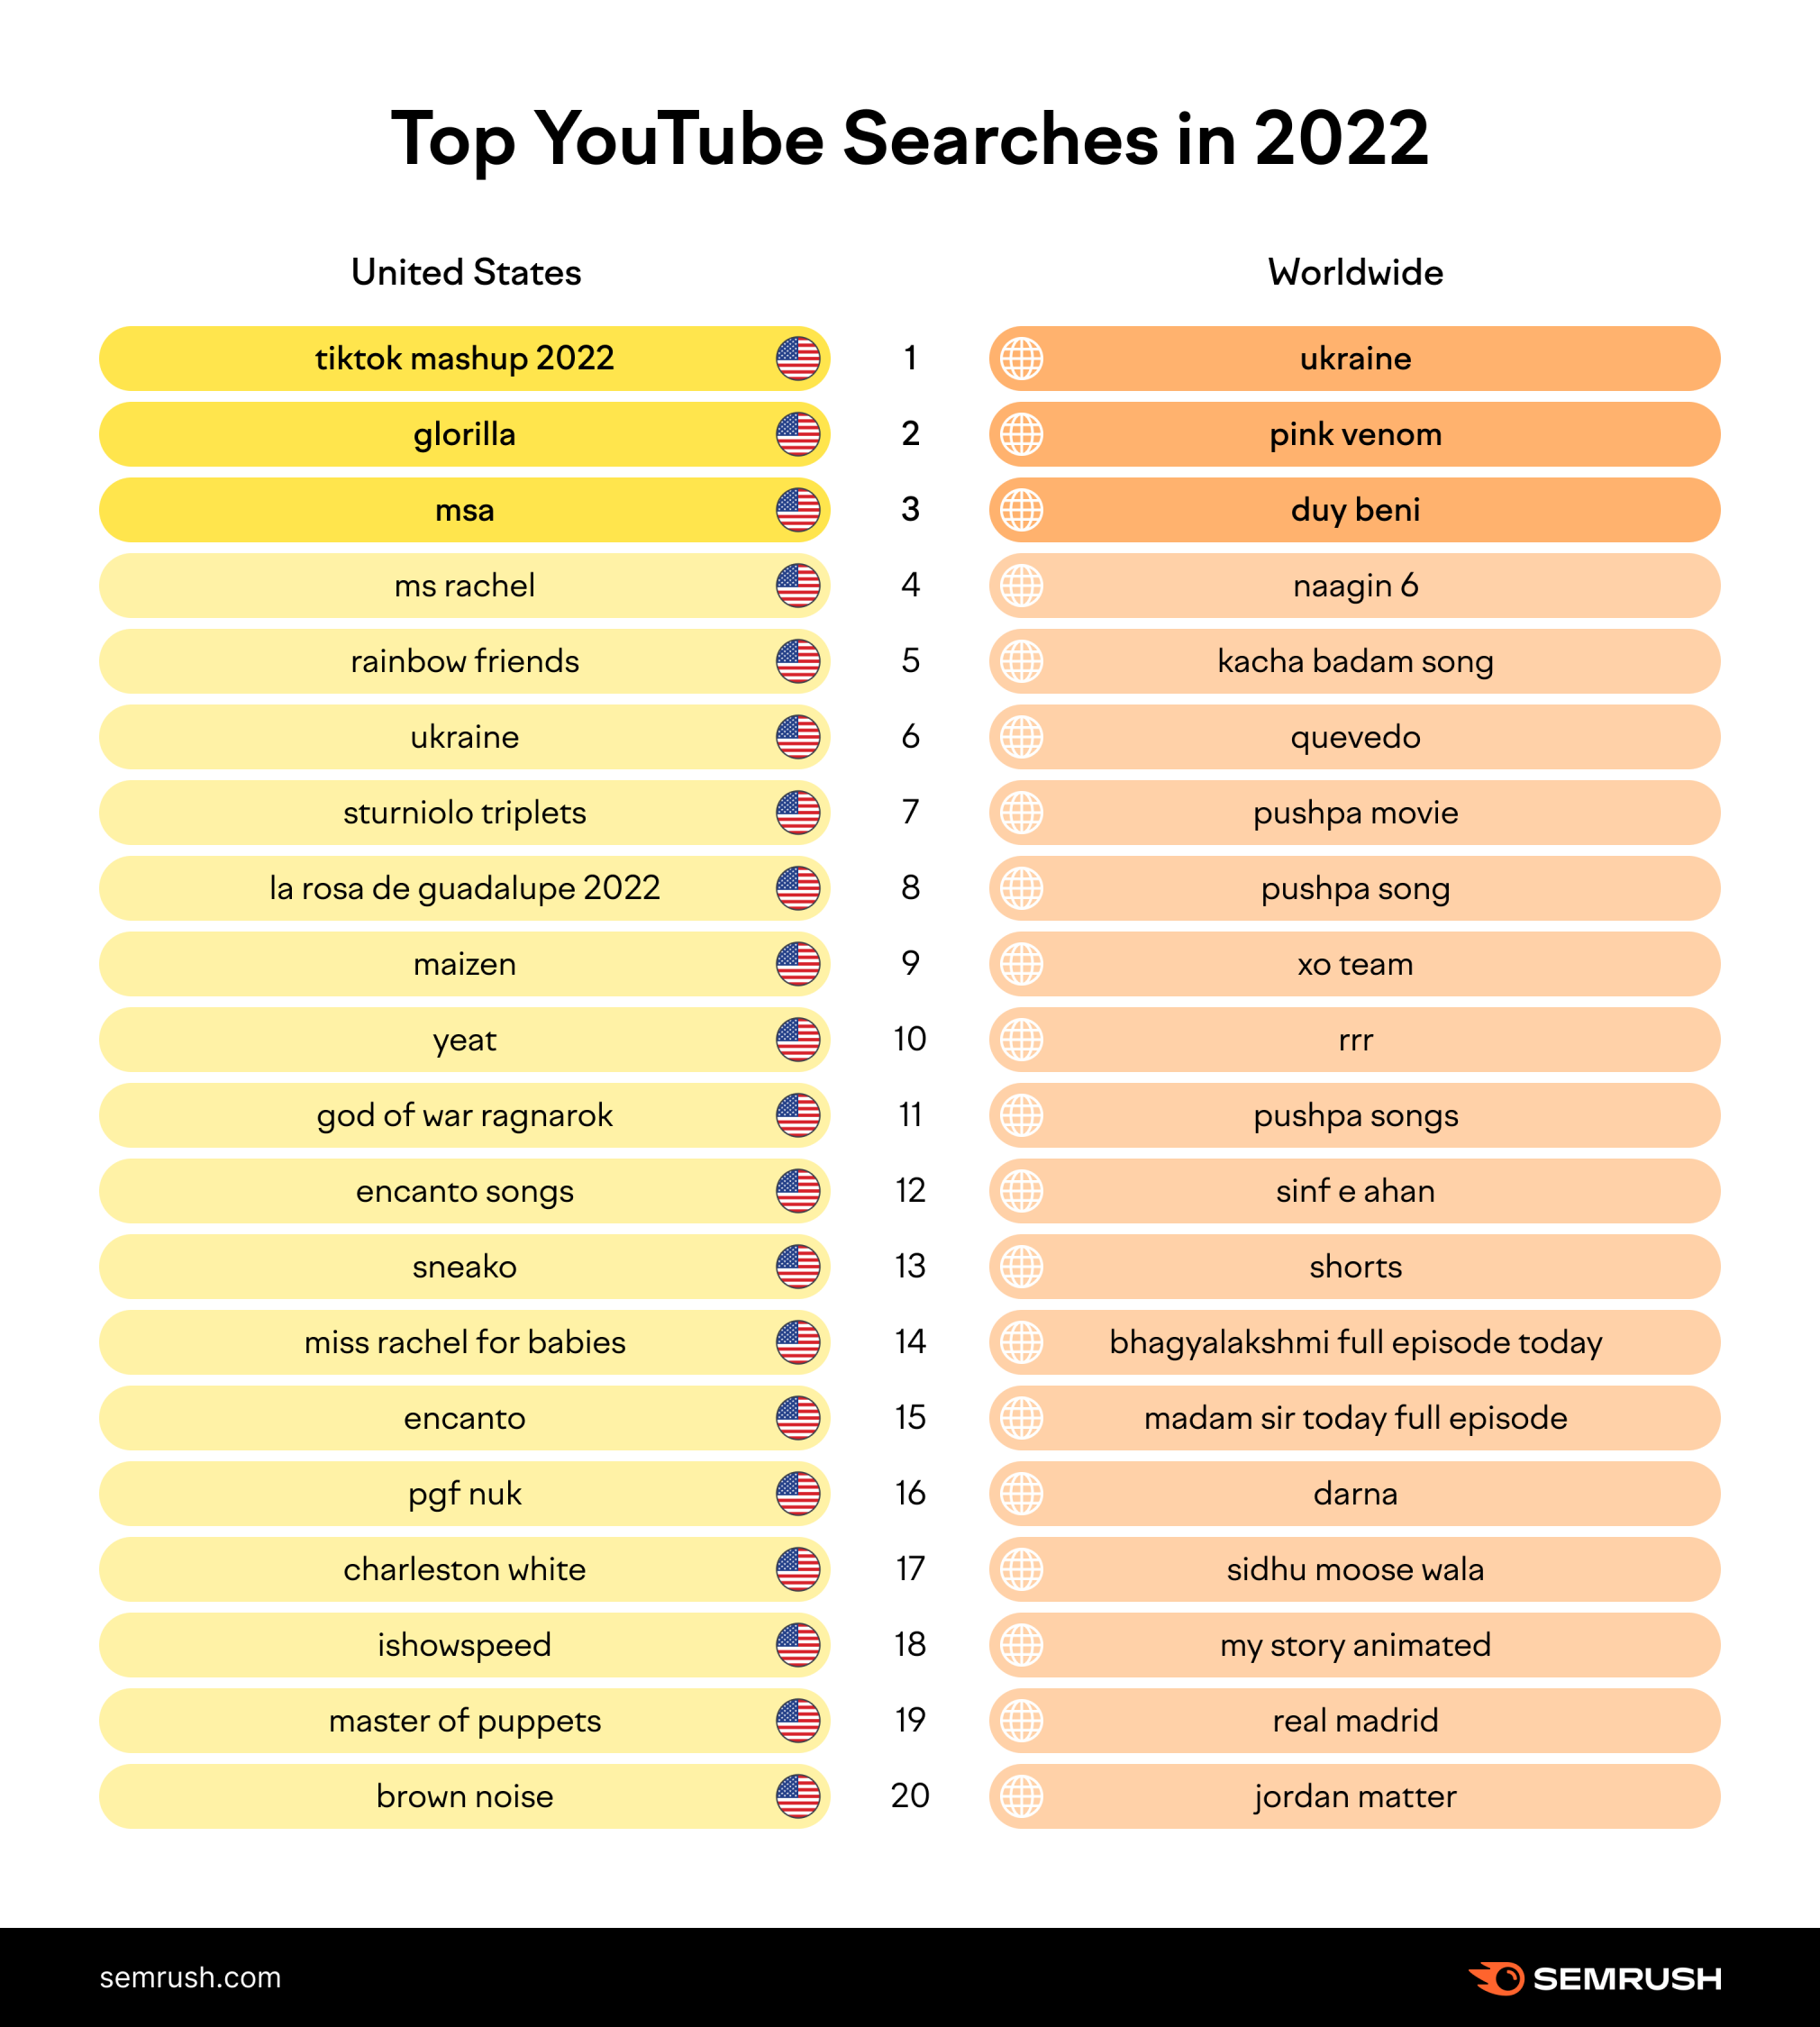 Top YouTube Searches—Most Searched on YouTube—Semrush